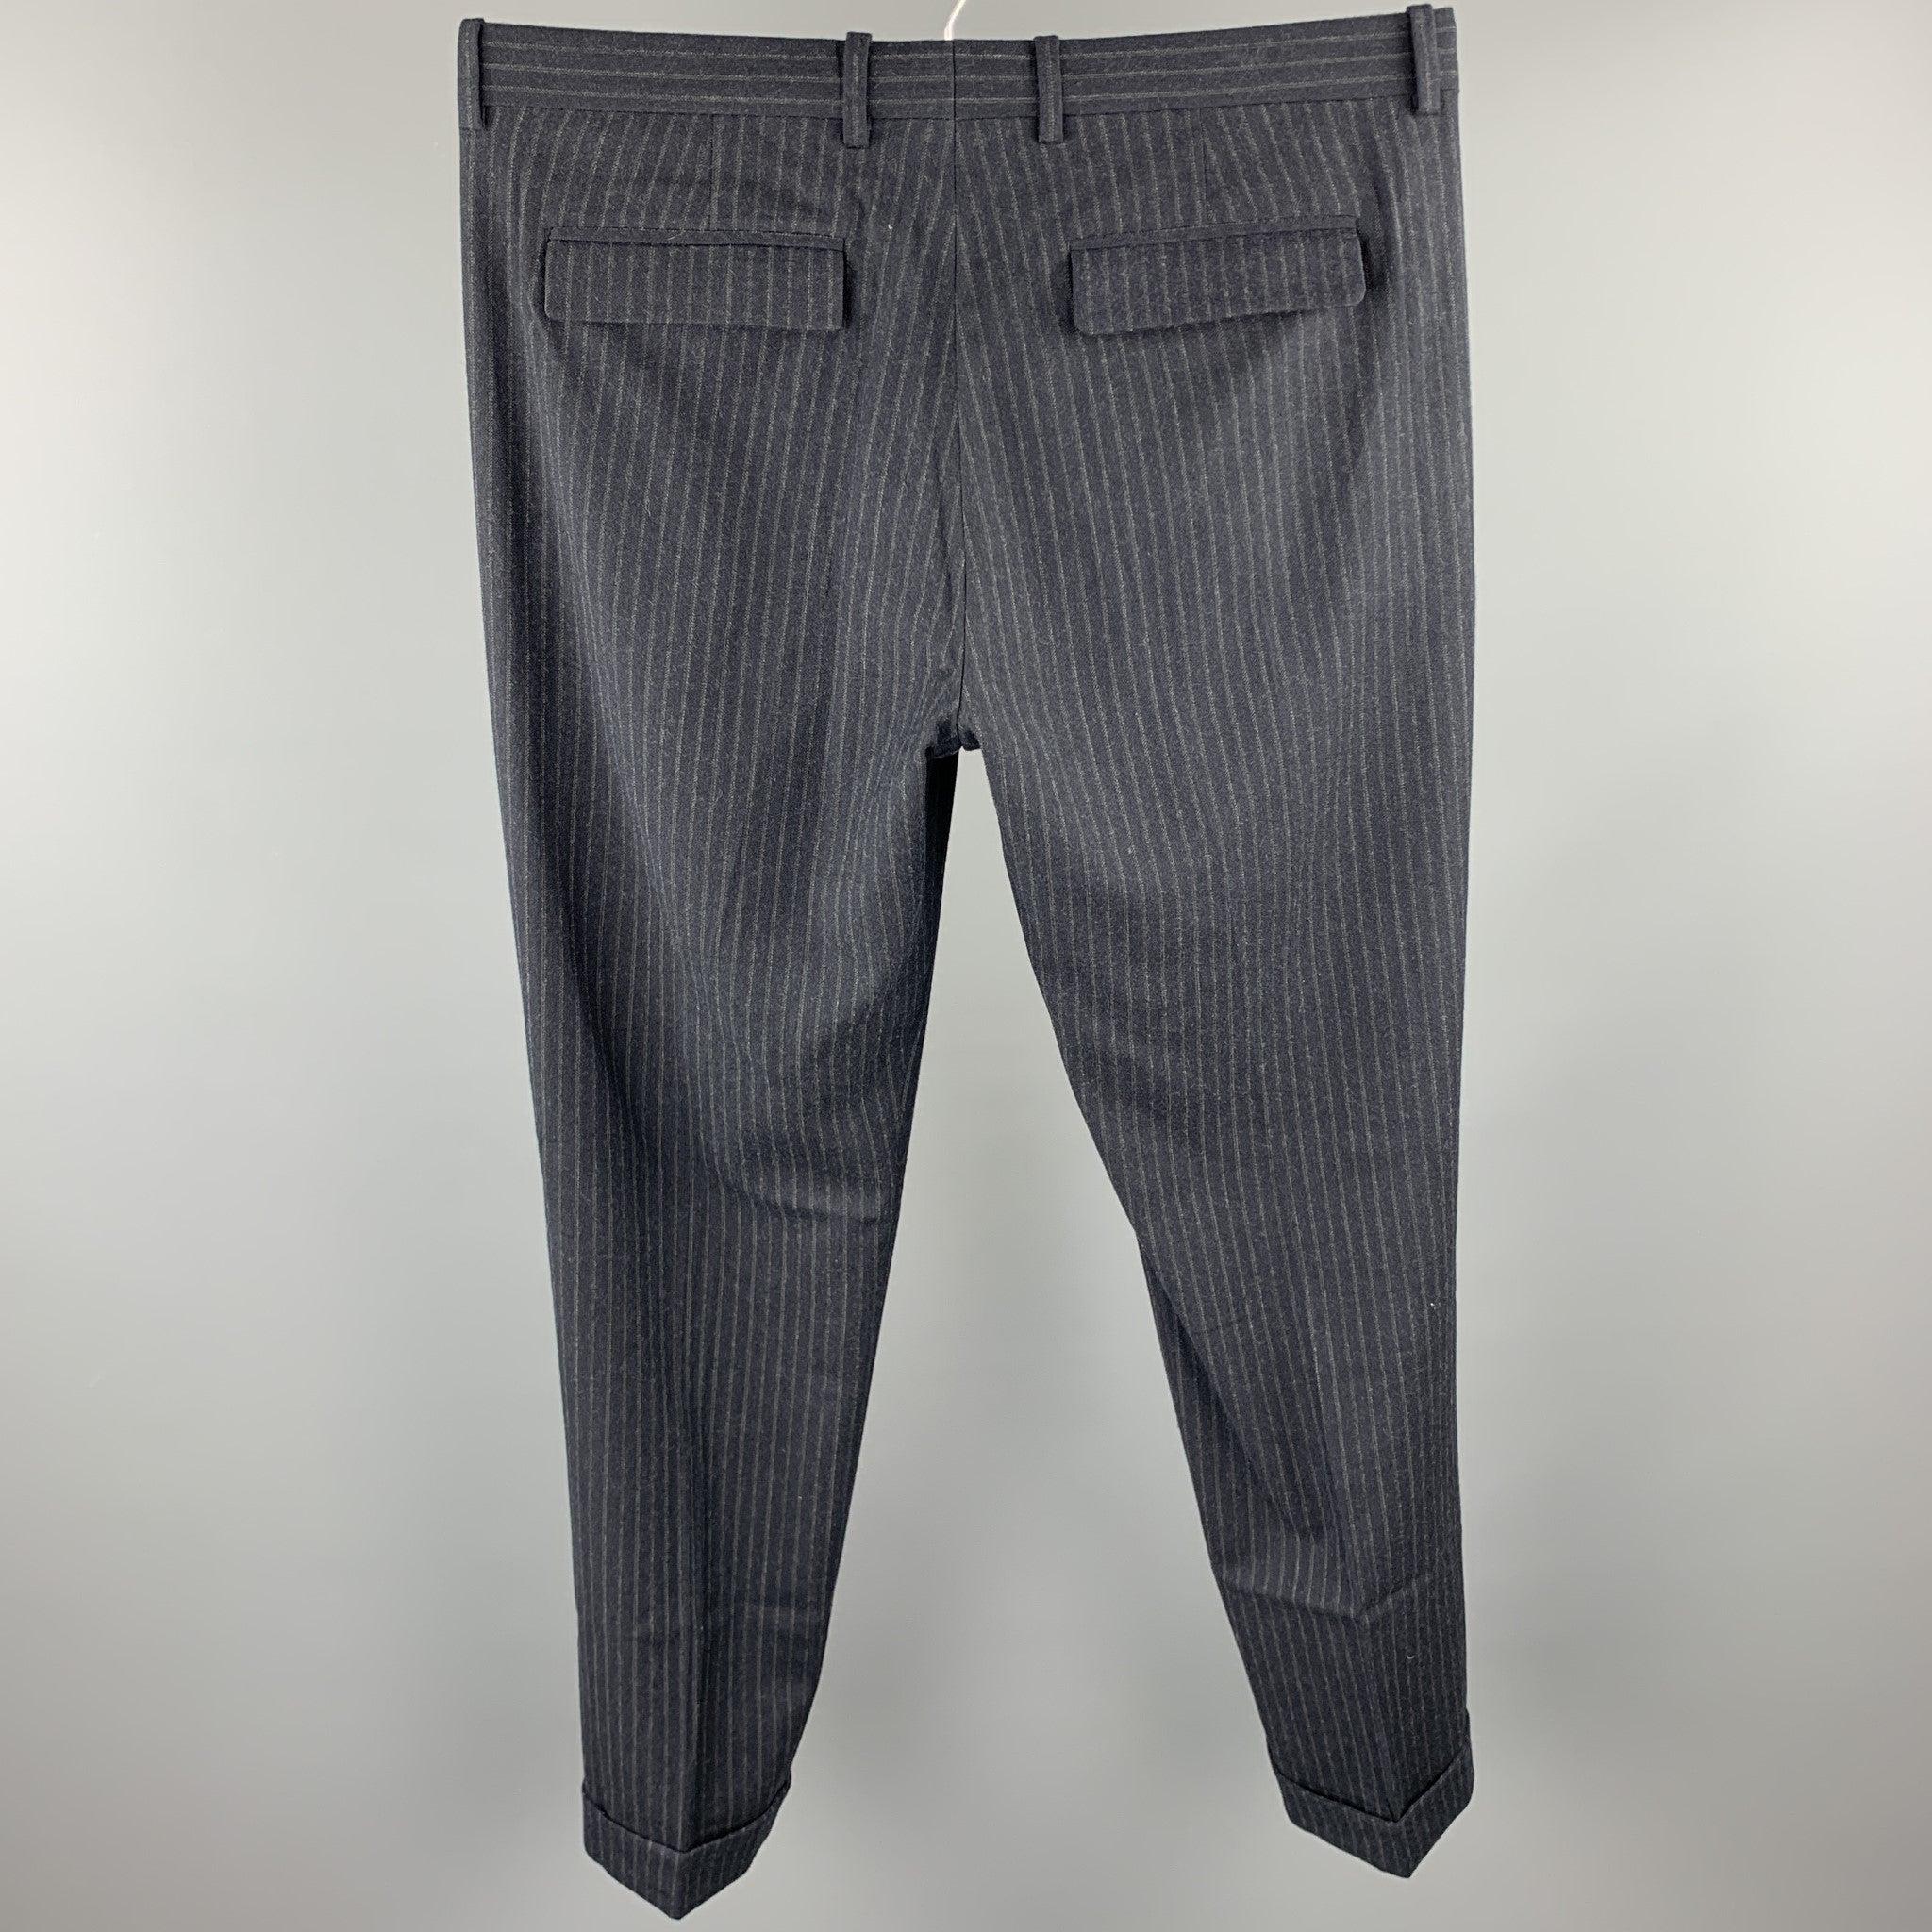 THEORY Size 34 Charcoal Stripe Wool Zip Fly Dress Pants In Good Condition For Sale In San Francisco, CA